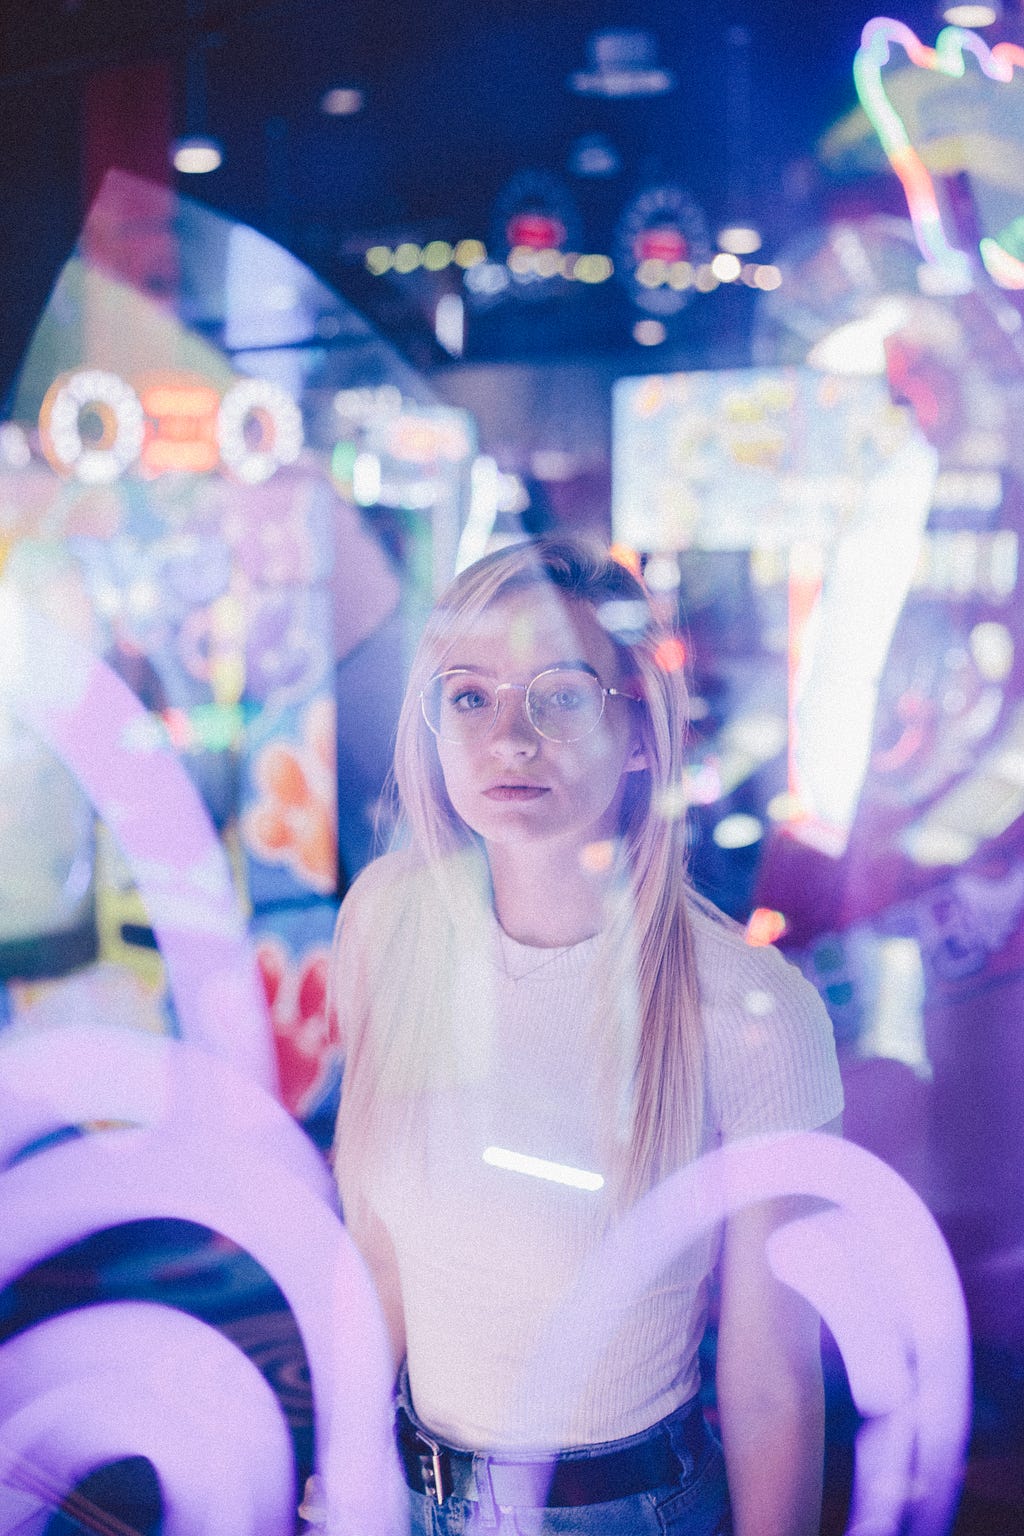 A woman standing behind glass. She is surrounding by colourful reflections and lights.